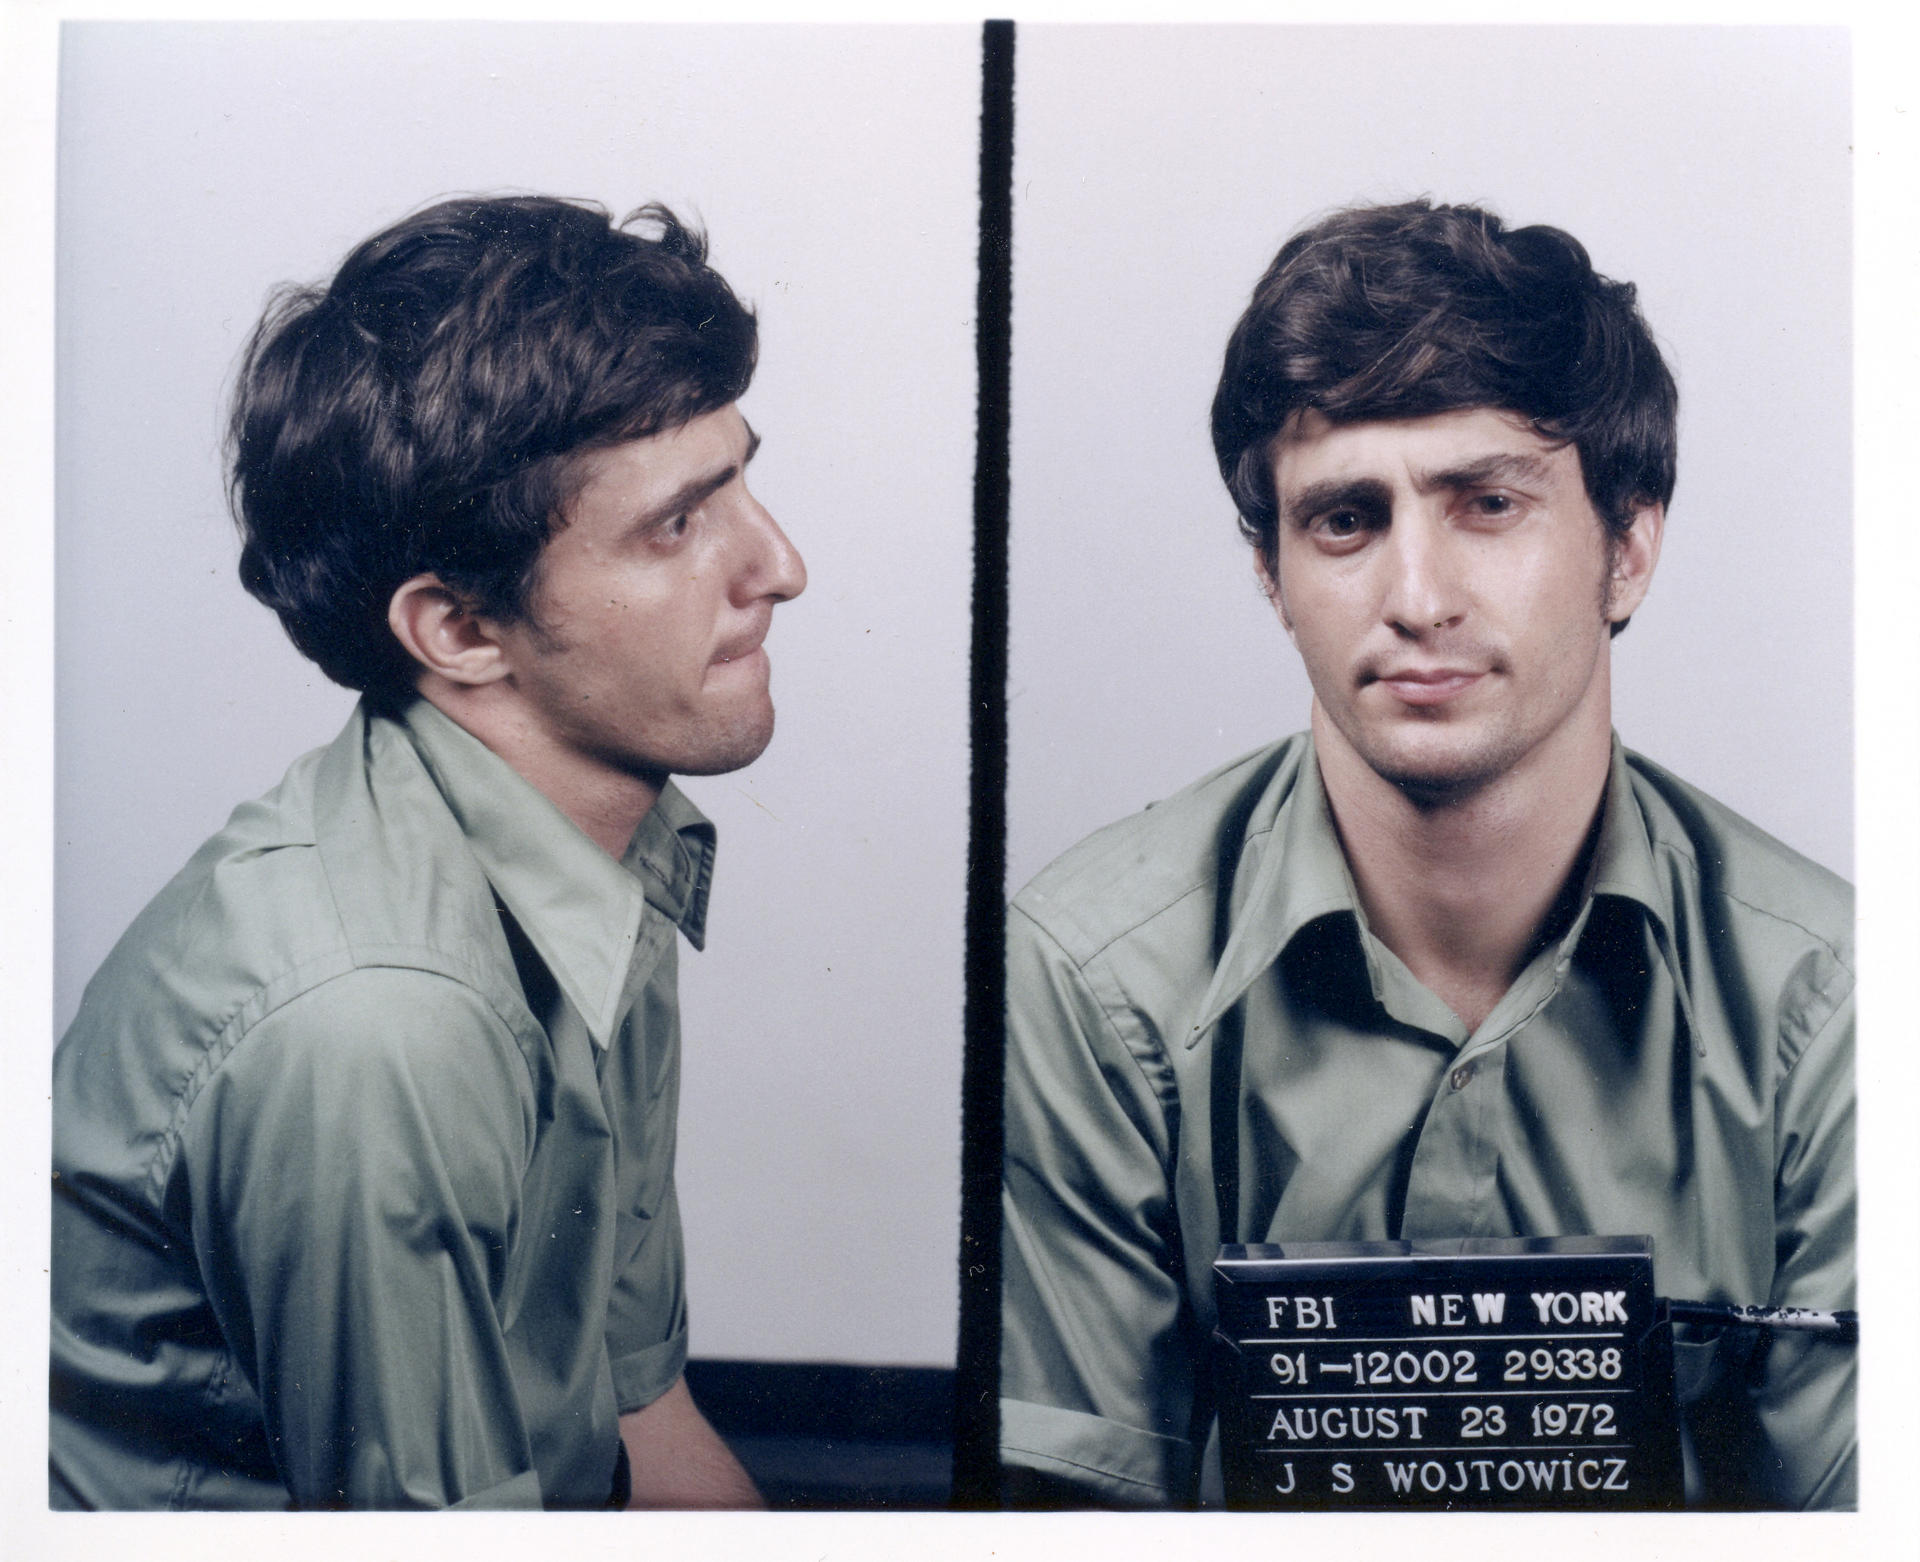 Bank robber John Wojtowicz in the 2013 documentary The Dog. His life inspired Sidney Lumet's 1975 film, Dog Day Afternoon.